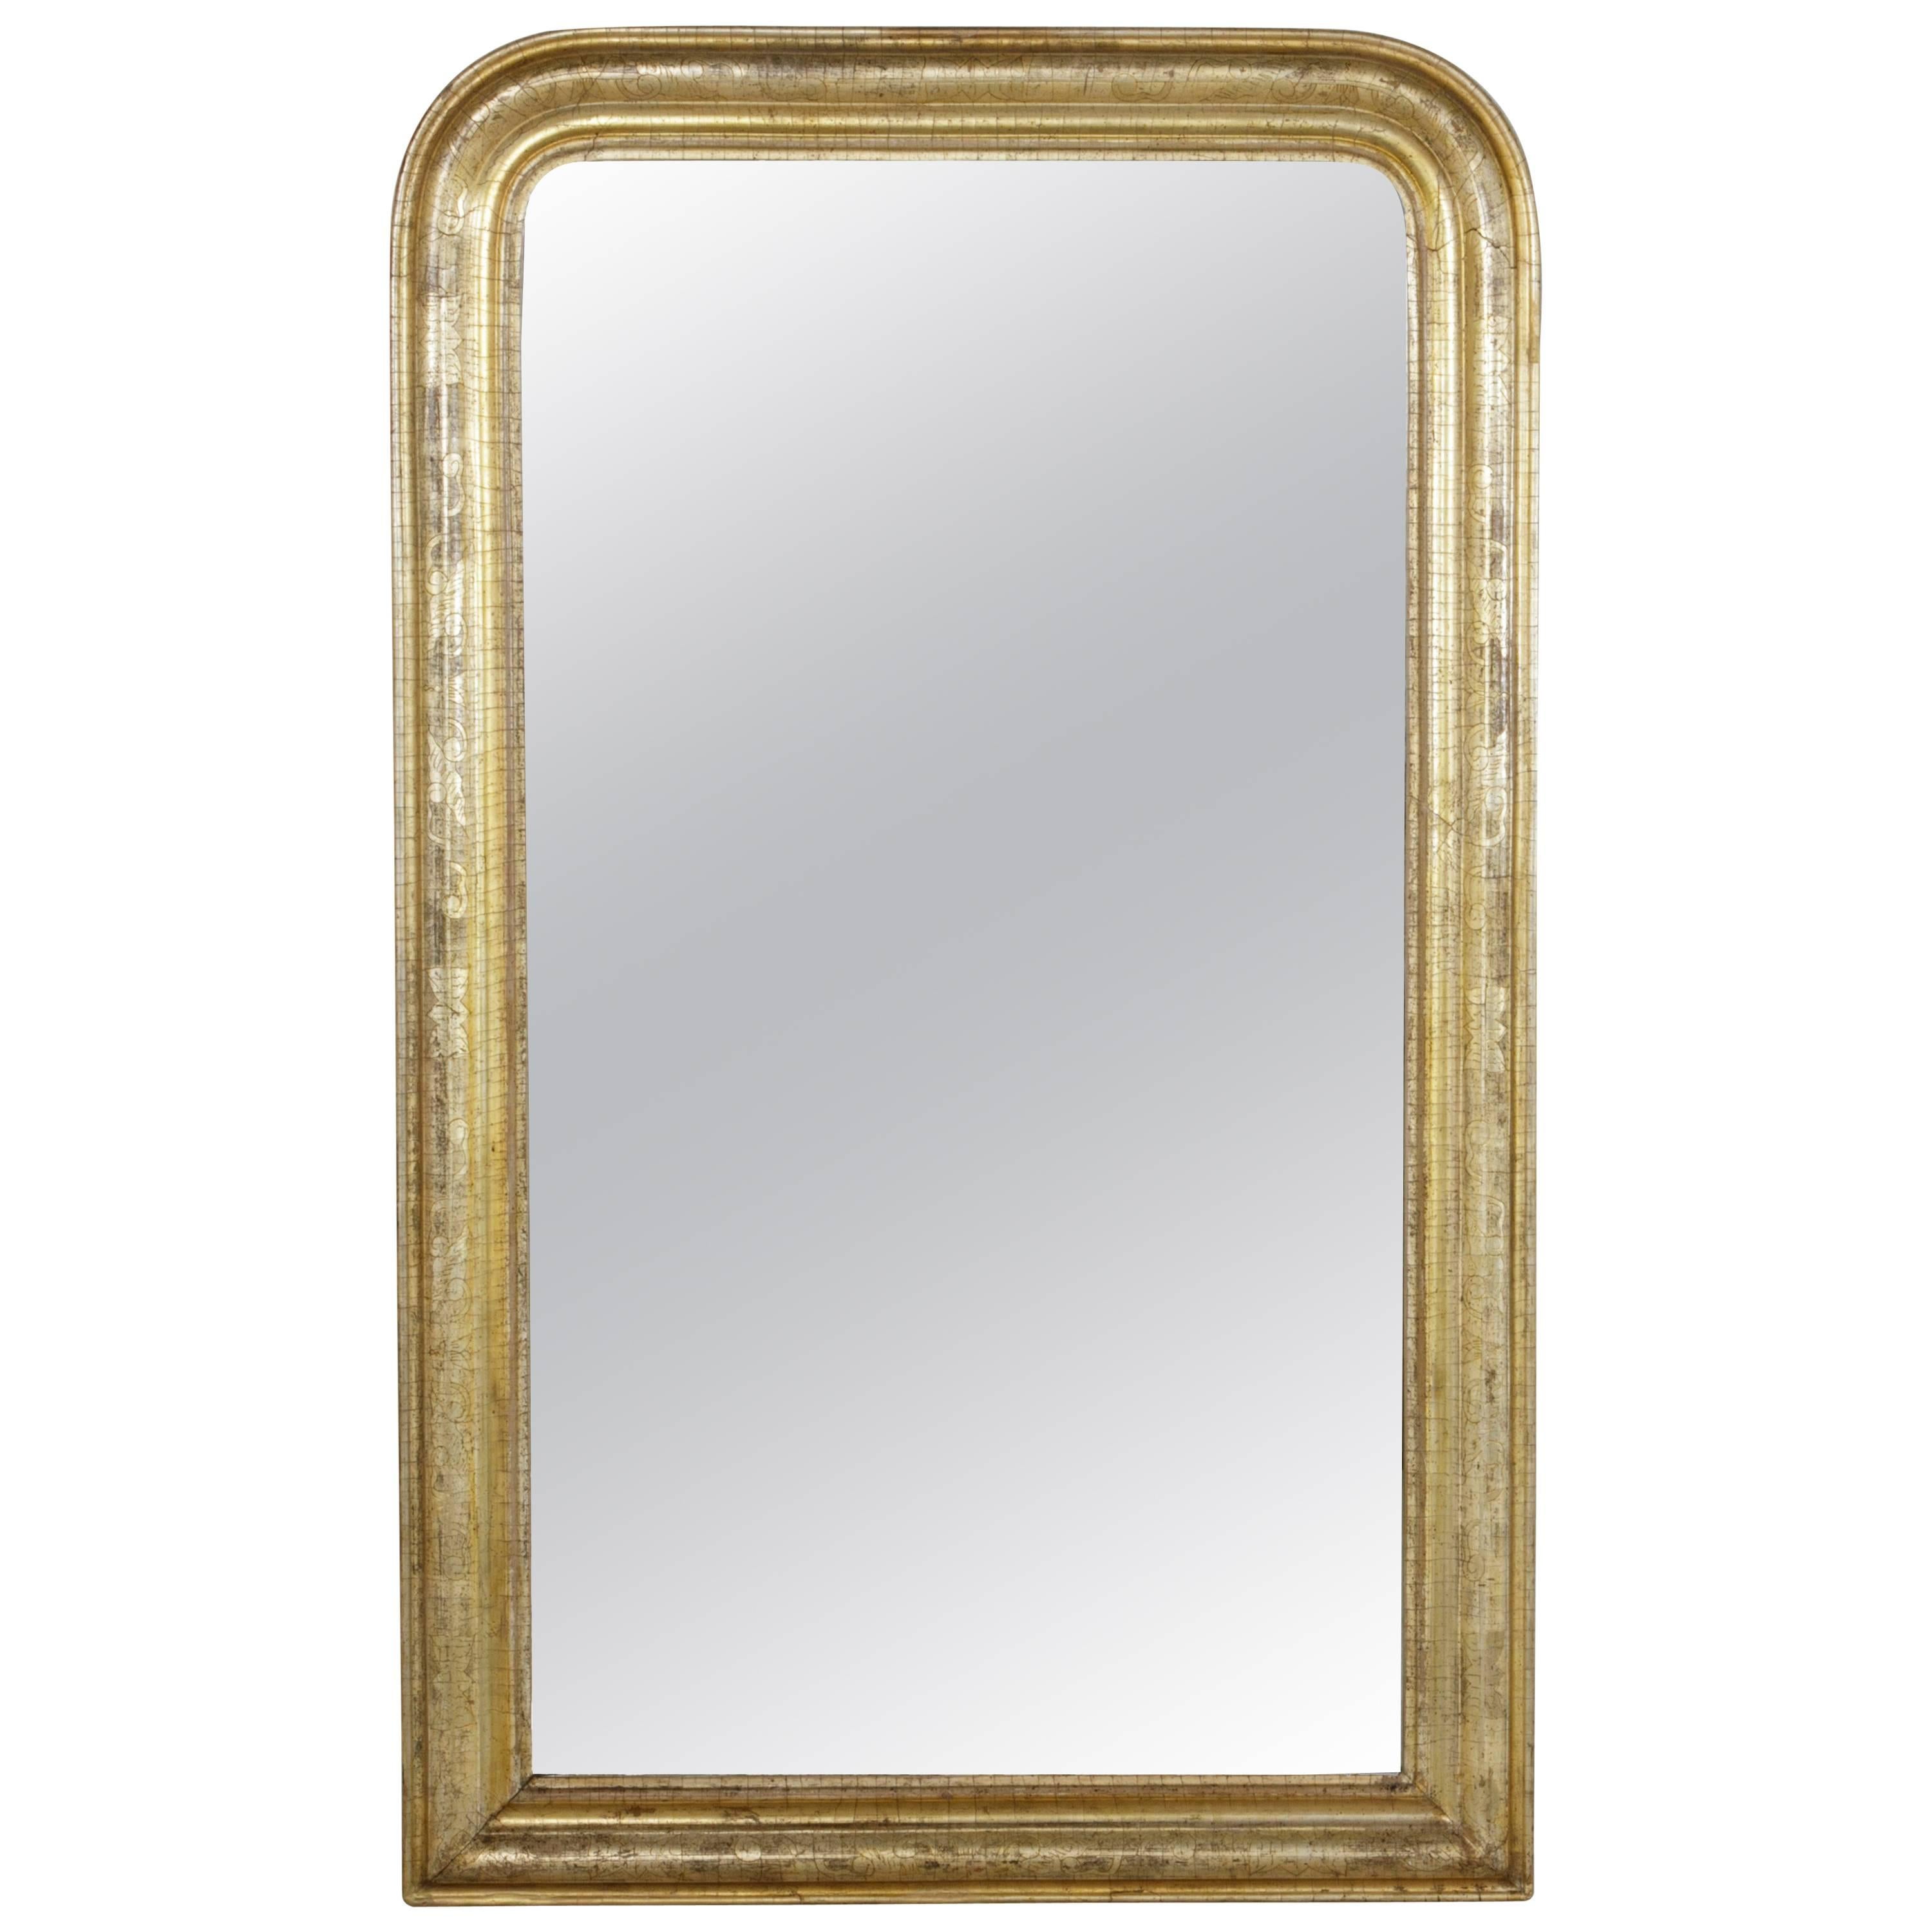 19th Century French Louis Philippe Gilt Wood Mirror with Silver and Gold Patina